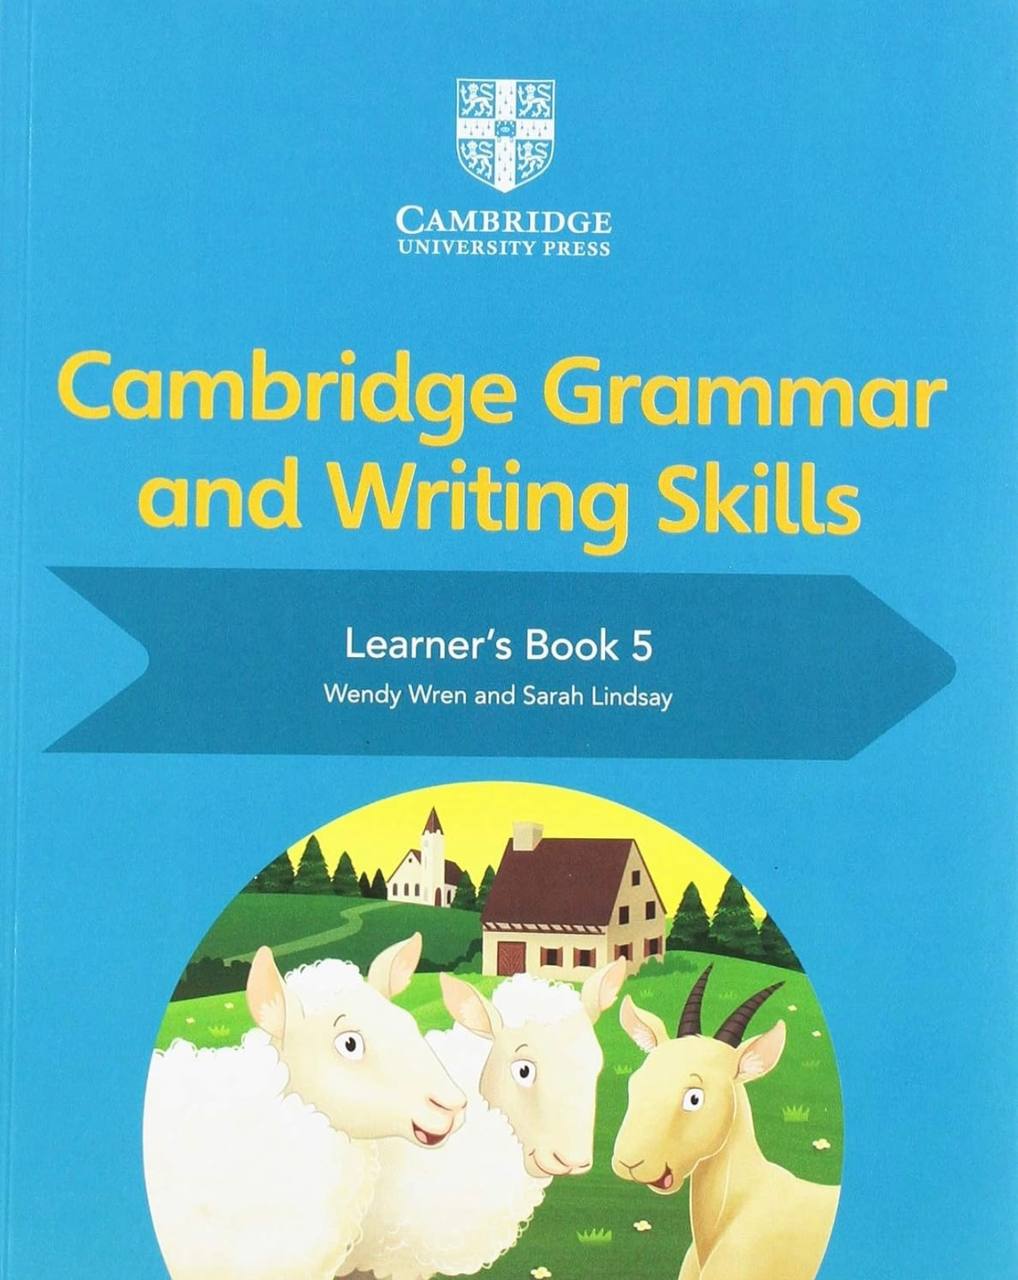 Cambridge Grammar and Writing Skills Learner's Book 1 to 9